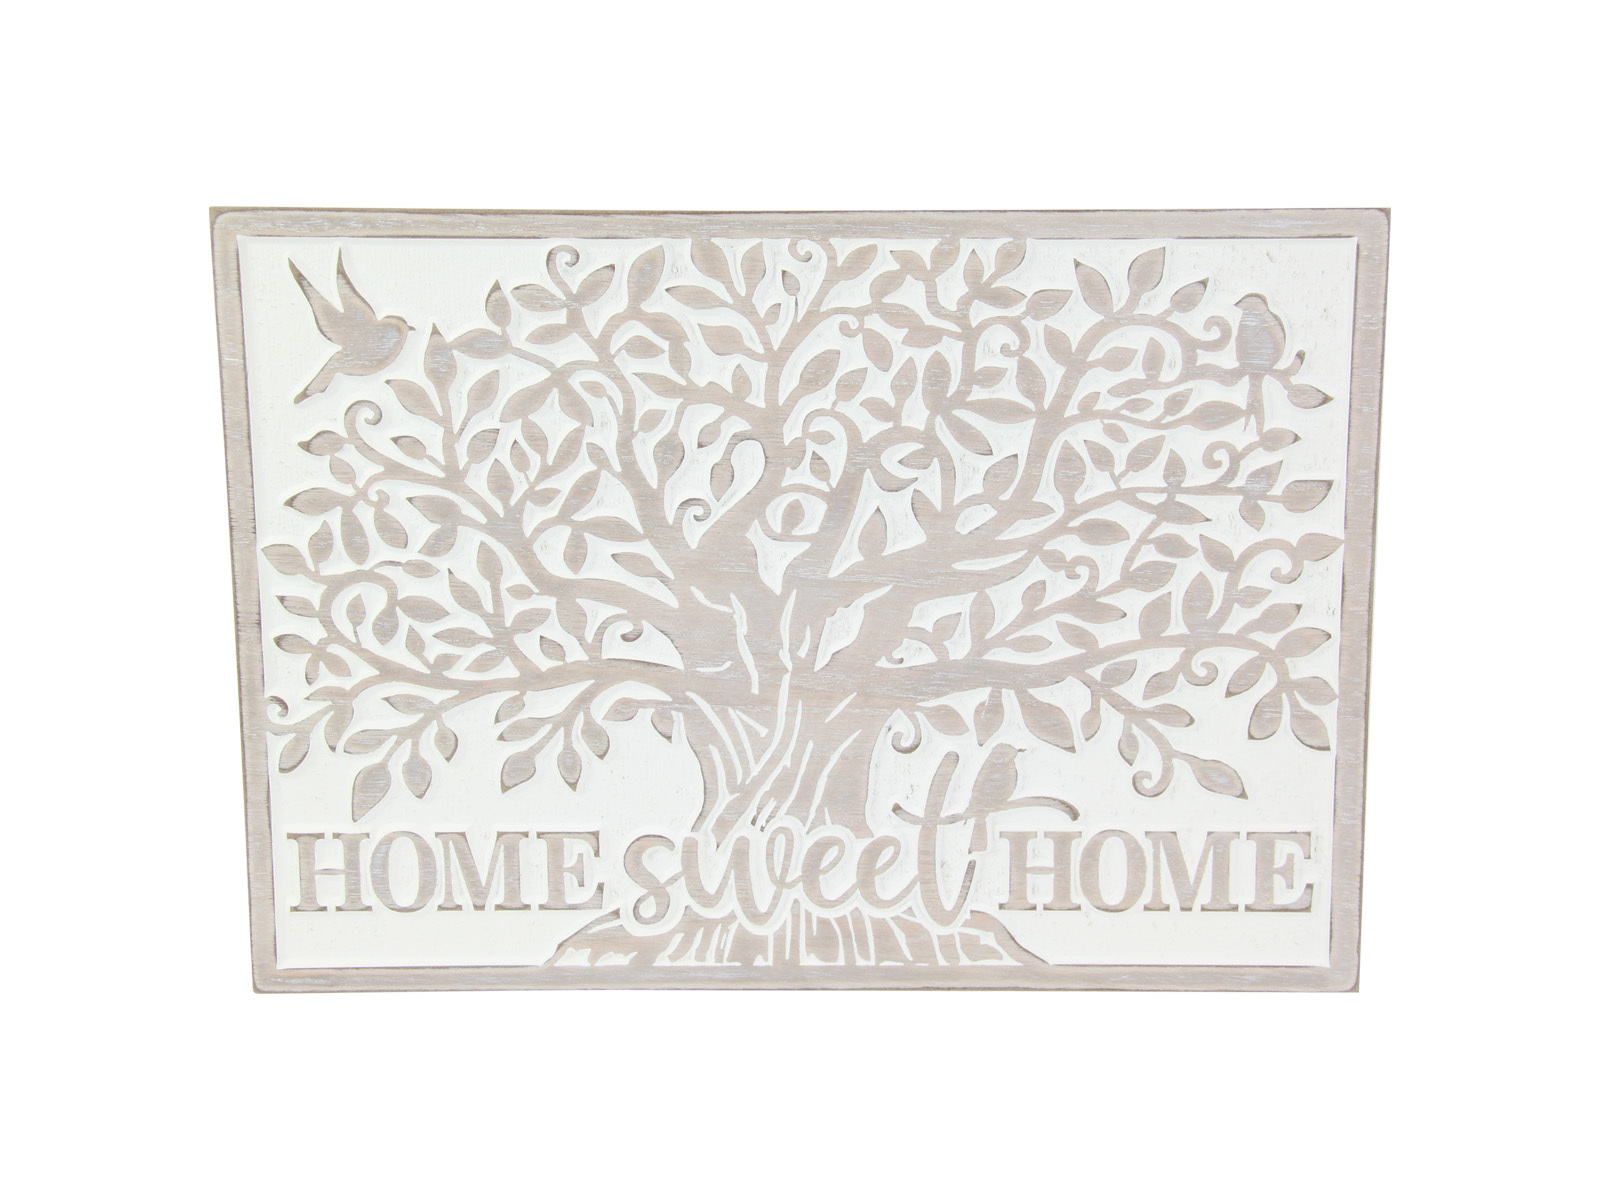 Home Sweet Home Plaque Inspirational Sign 40cm Tree Of Life White Mdf Wall Art